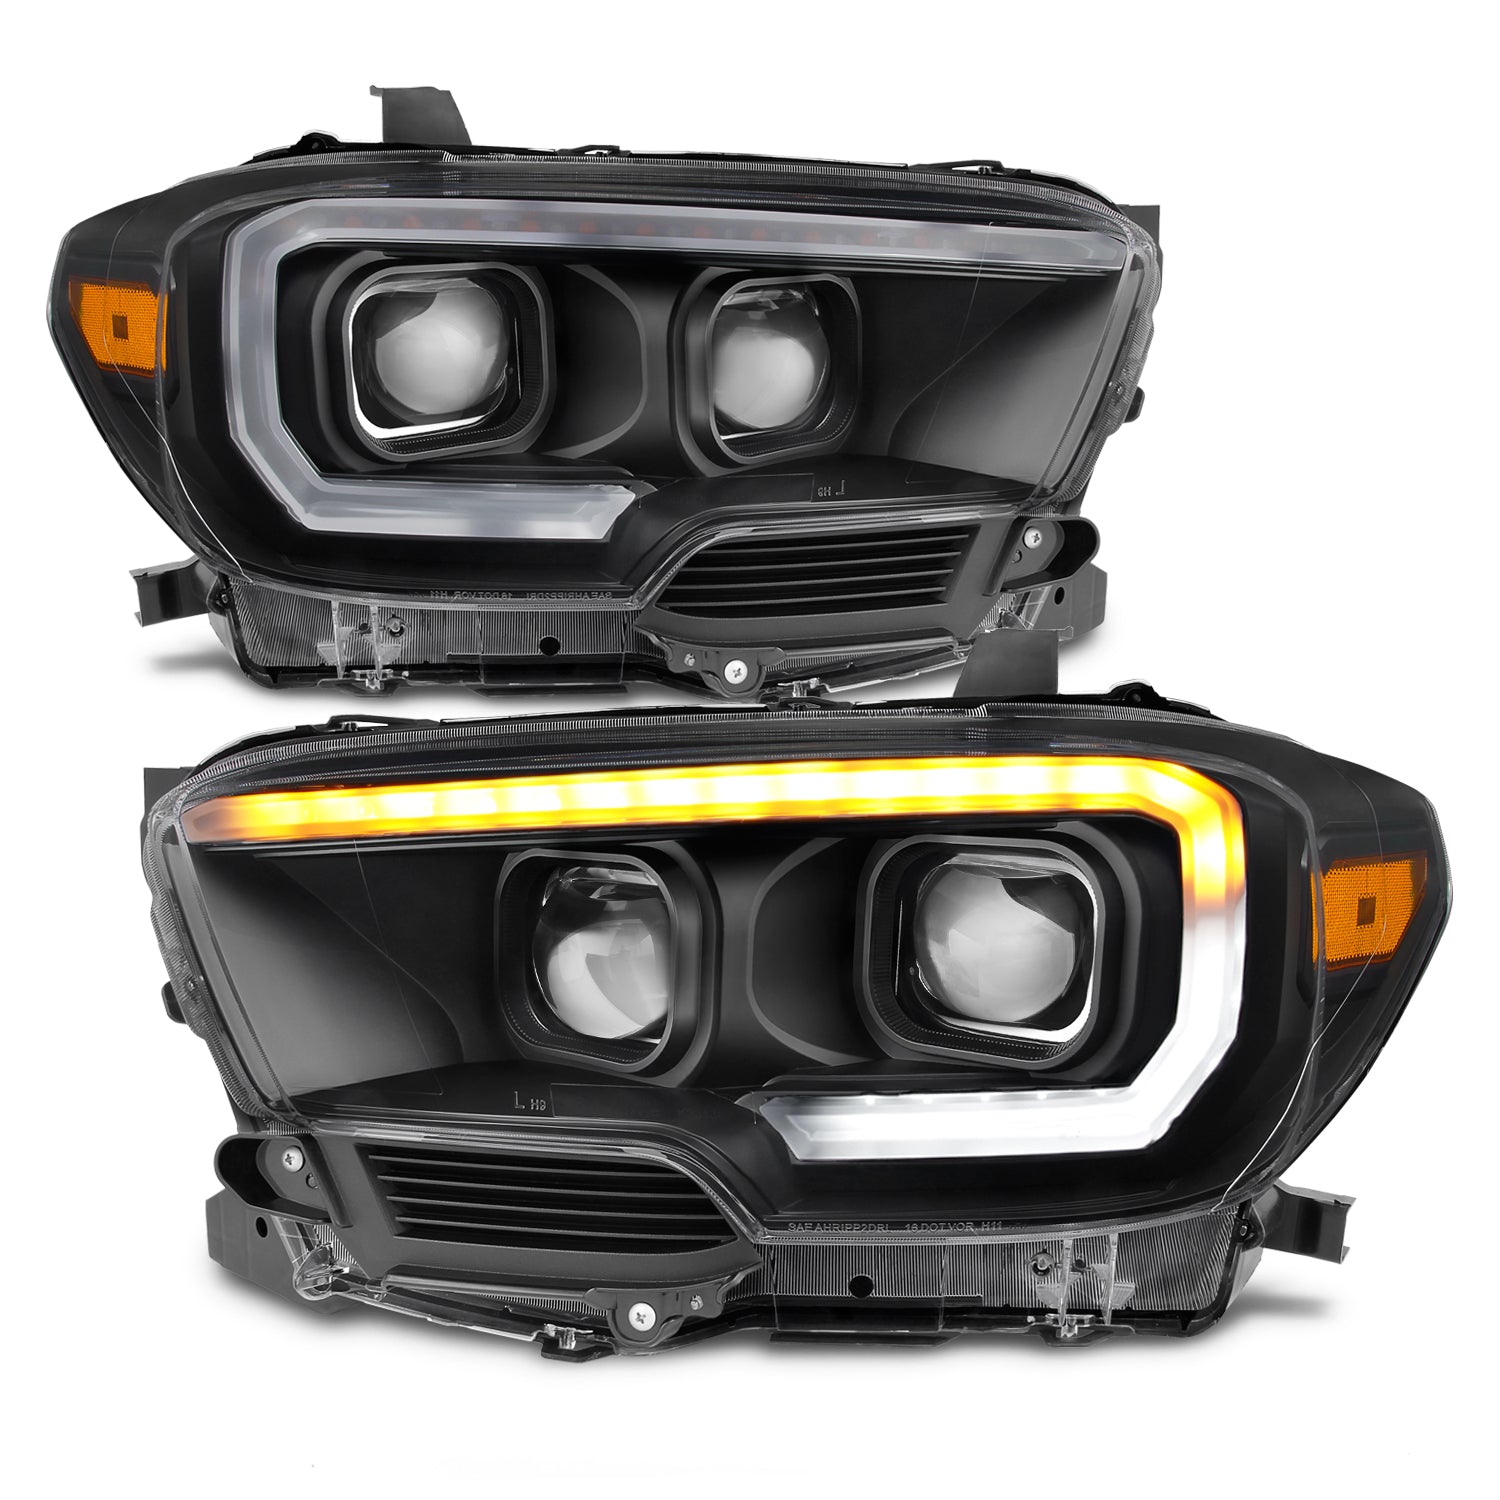  AKKON - For Cadillac Escalade Chrome Clear Halogen Type  Headlights Front Lamps Replacement Pair Left + Right : Automotive